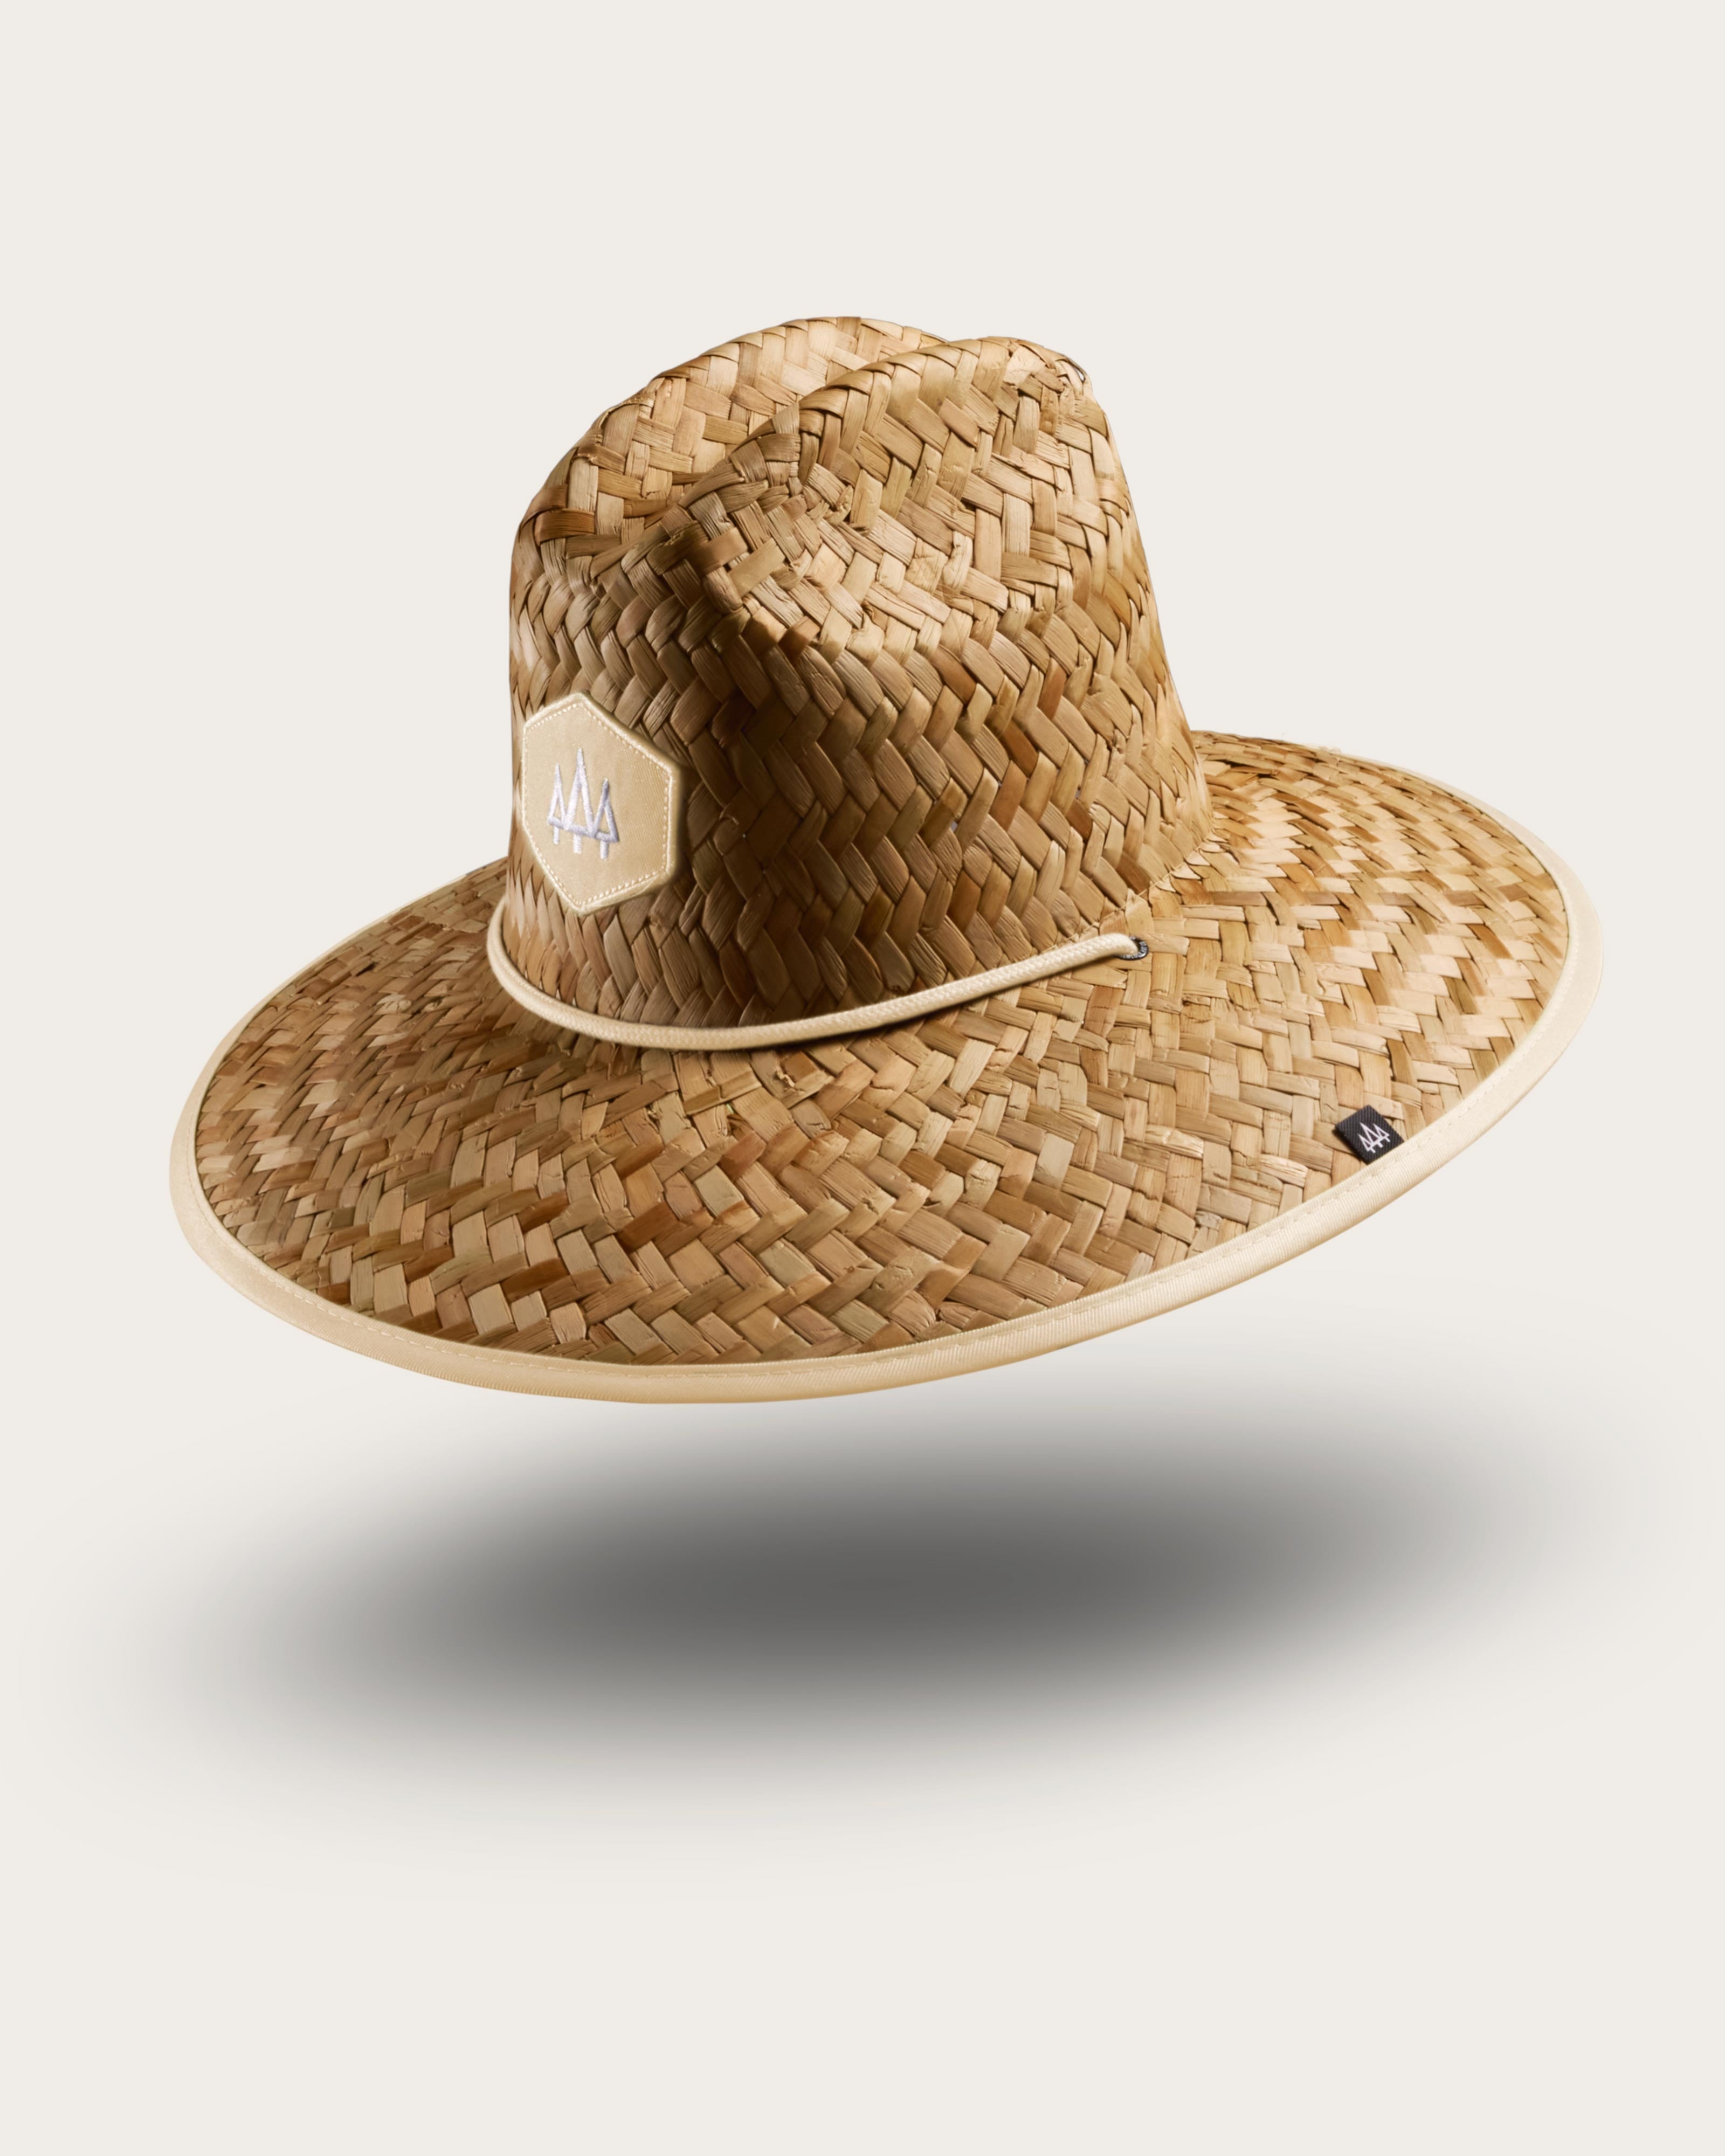 Hemlock Butter straw lifeguard hat with yellow pattern with patch